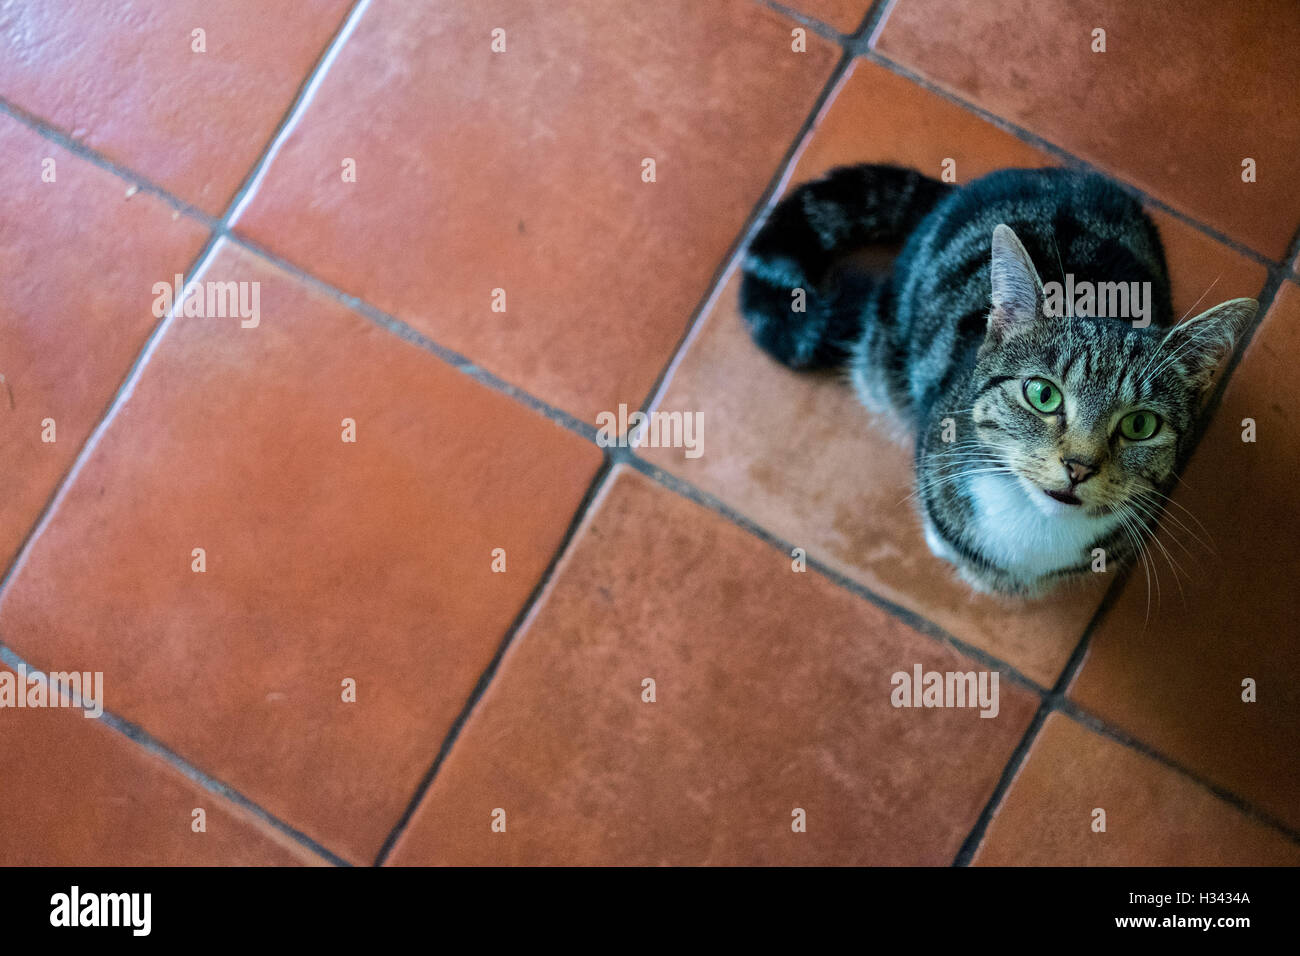 Small cat sitting on terracotta tiles looking up Stock Photo